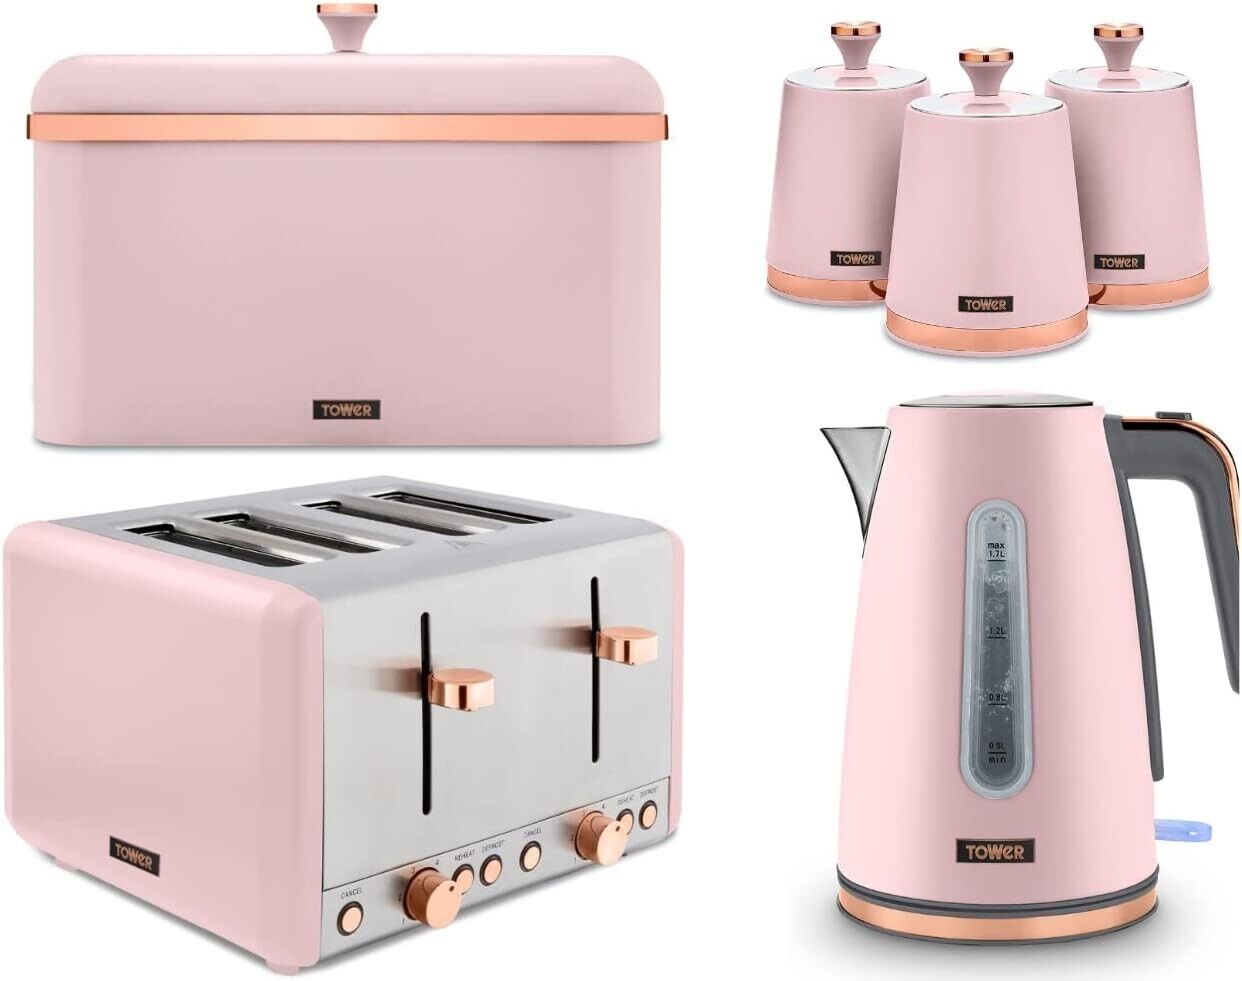 Tower Cavaletto Pink 1.7L 3KW Jug Kettle, 4 Slice Toaster, Bread Bin & Canisters Matching Kitchen Set of 6